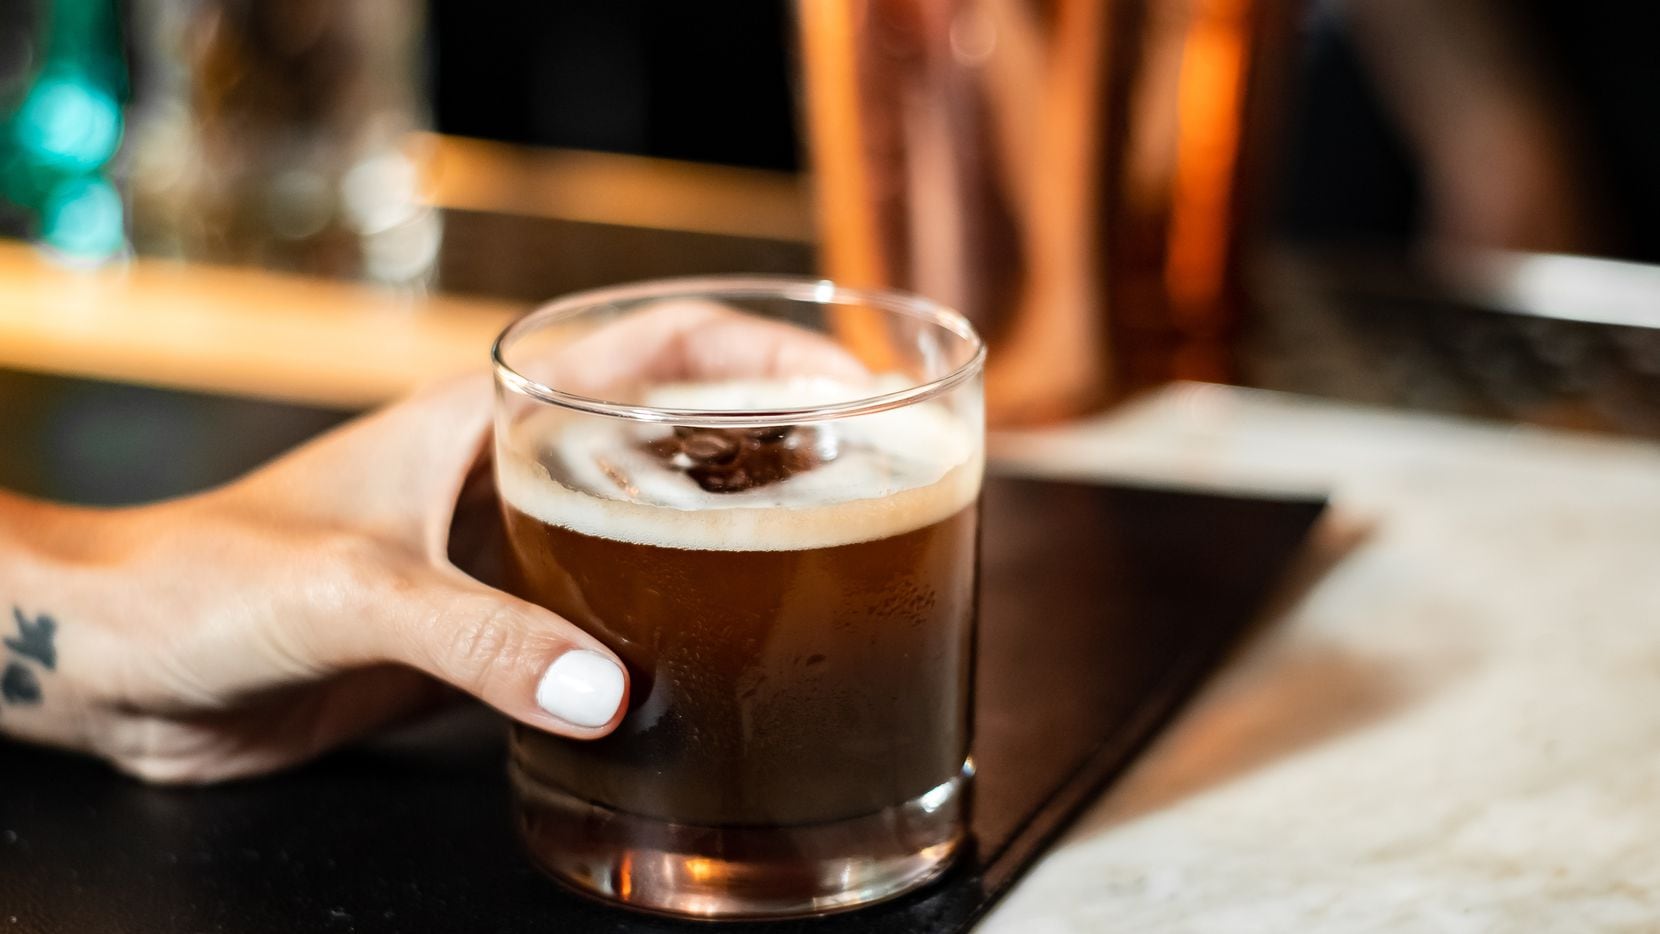 Kessaku, a sushi lounge in downtown Dallas, has a new espresso martini that puts all others...